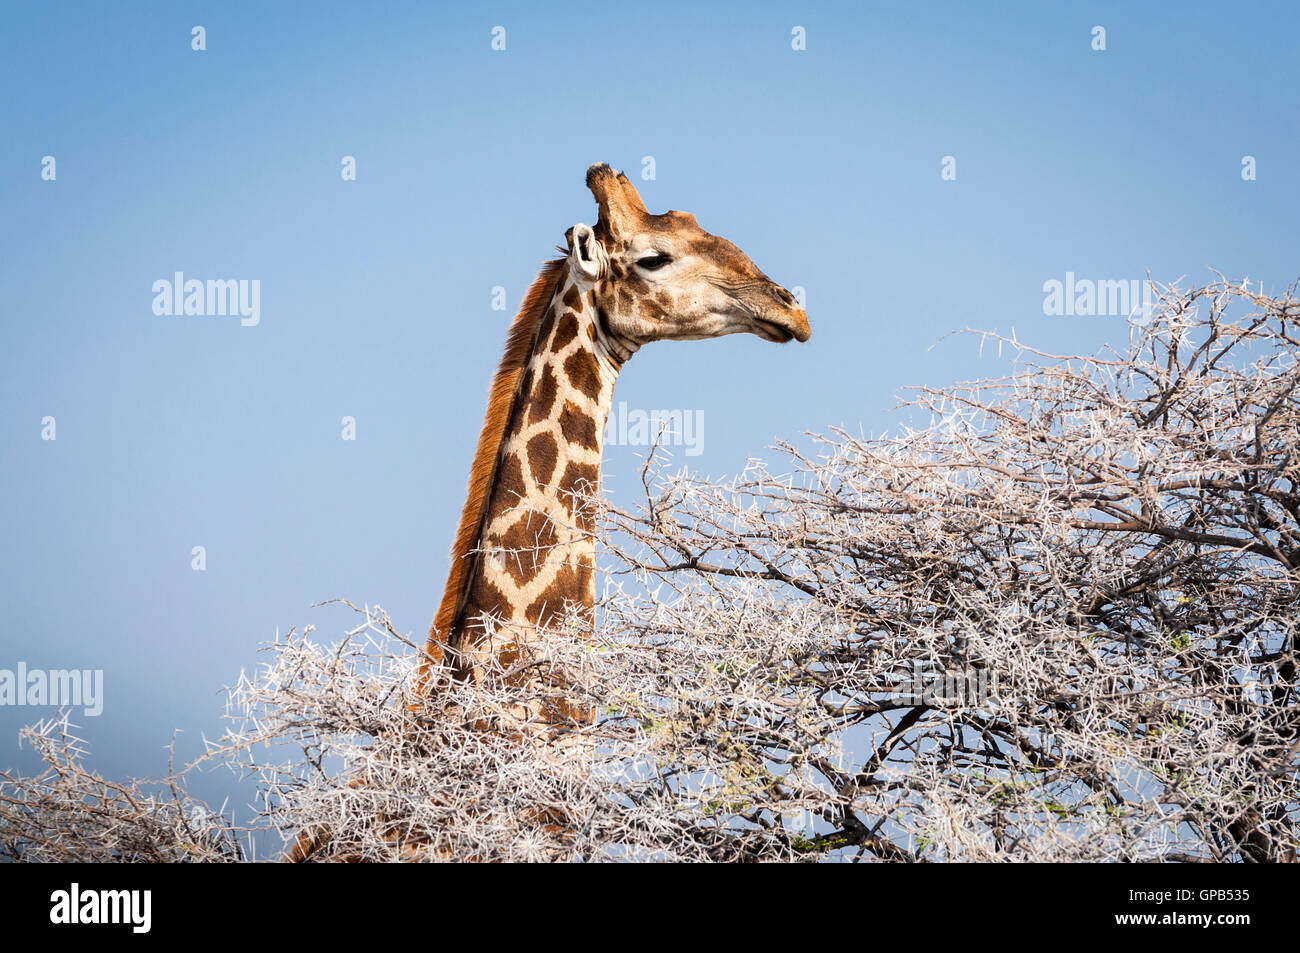 Head of a Giraffe eating from a tree in the Etosha National Park in Namibia, Africa; Concept for travel in Africa and Safari Stock Photo